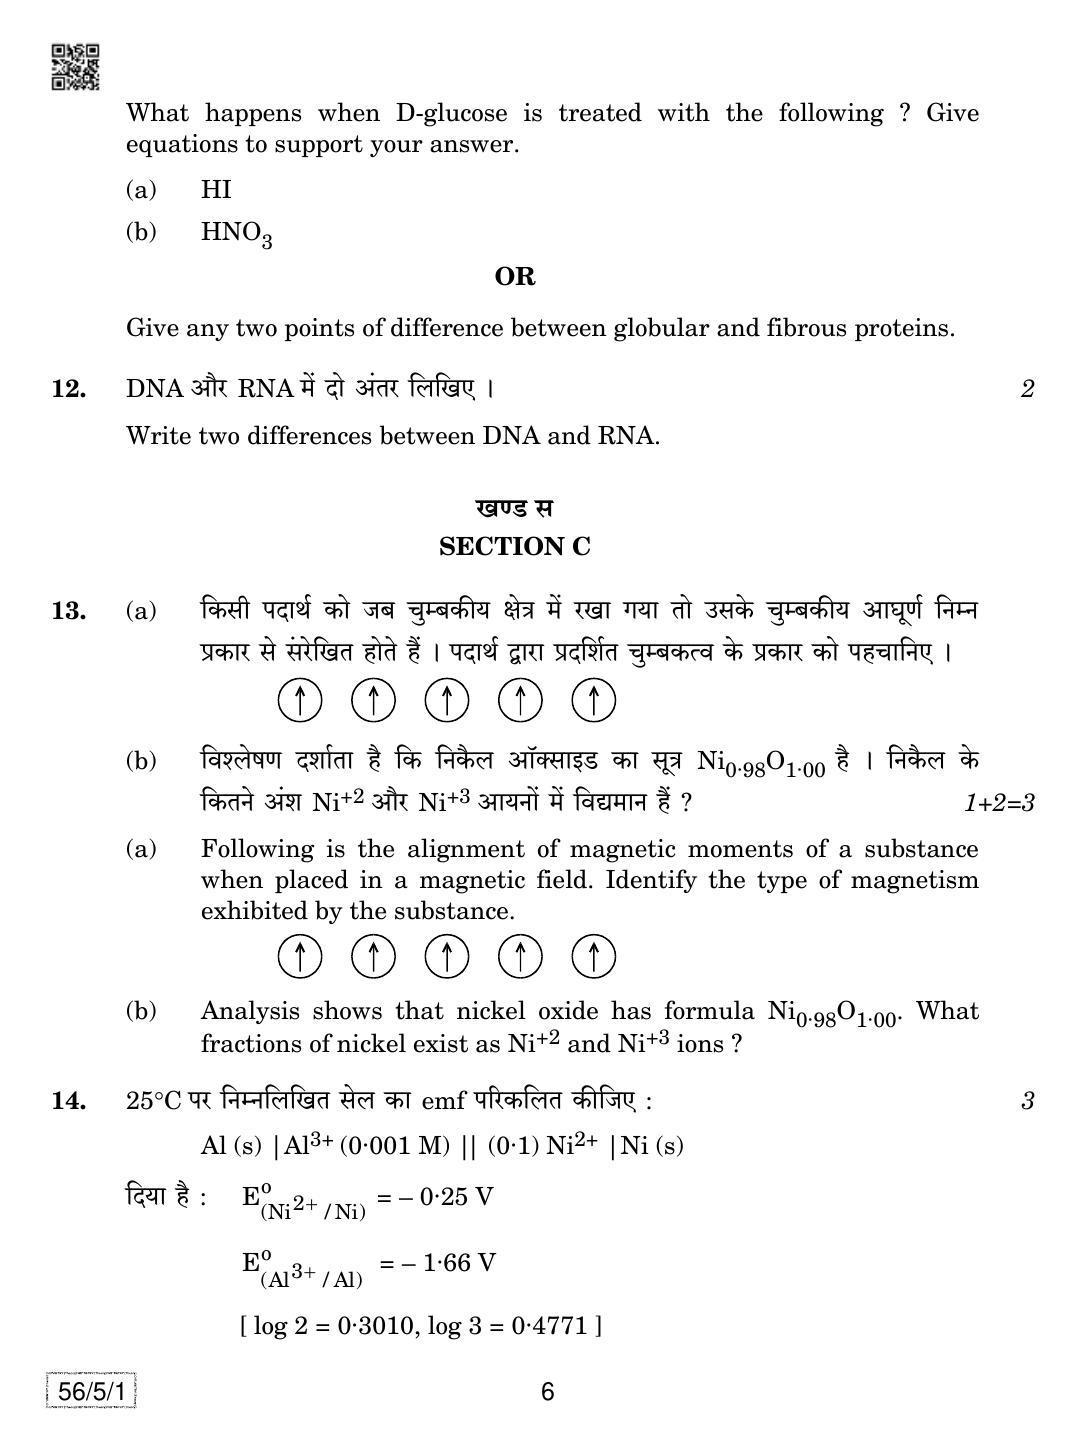 CBSE Class 12 56-5-1 Chemistry 2019 Question Paper - Page 6